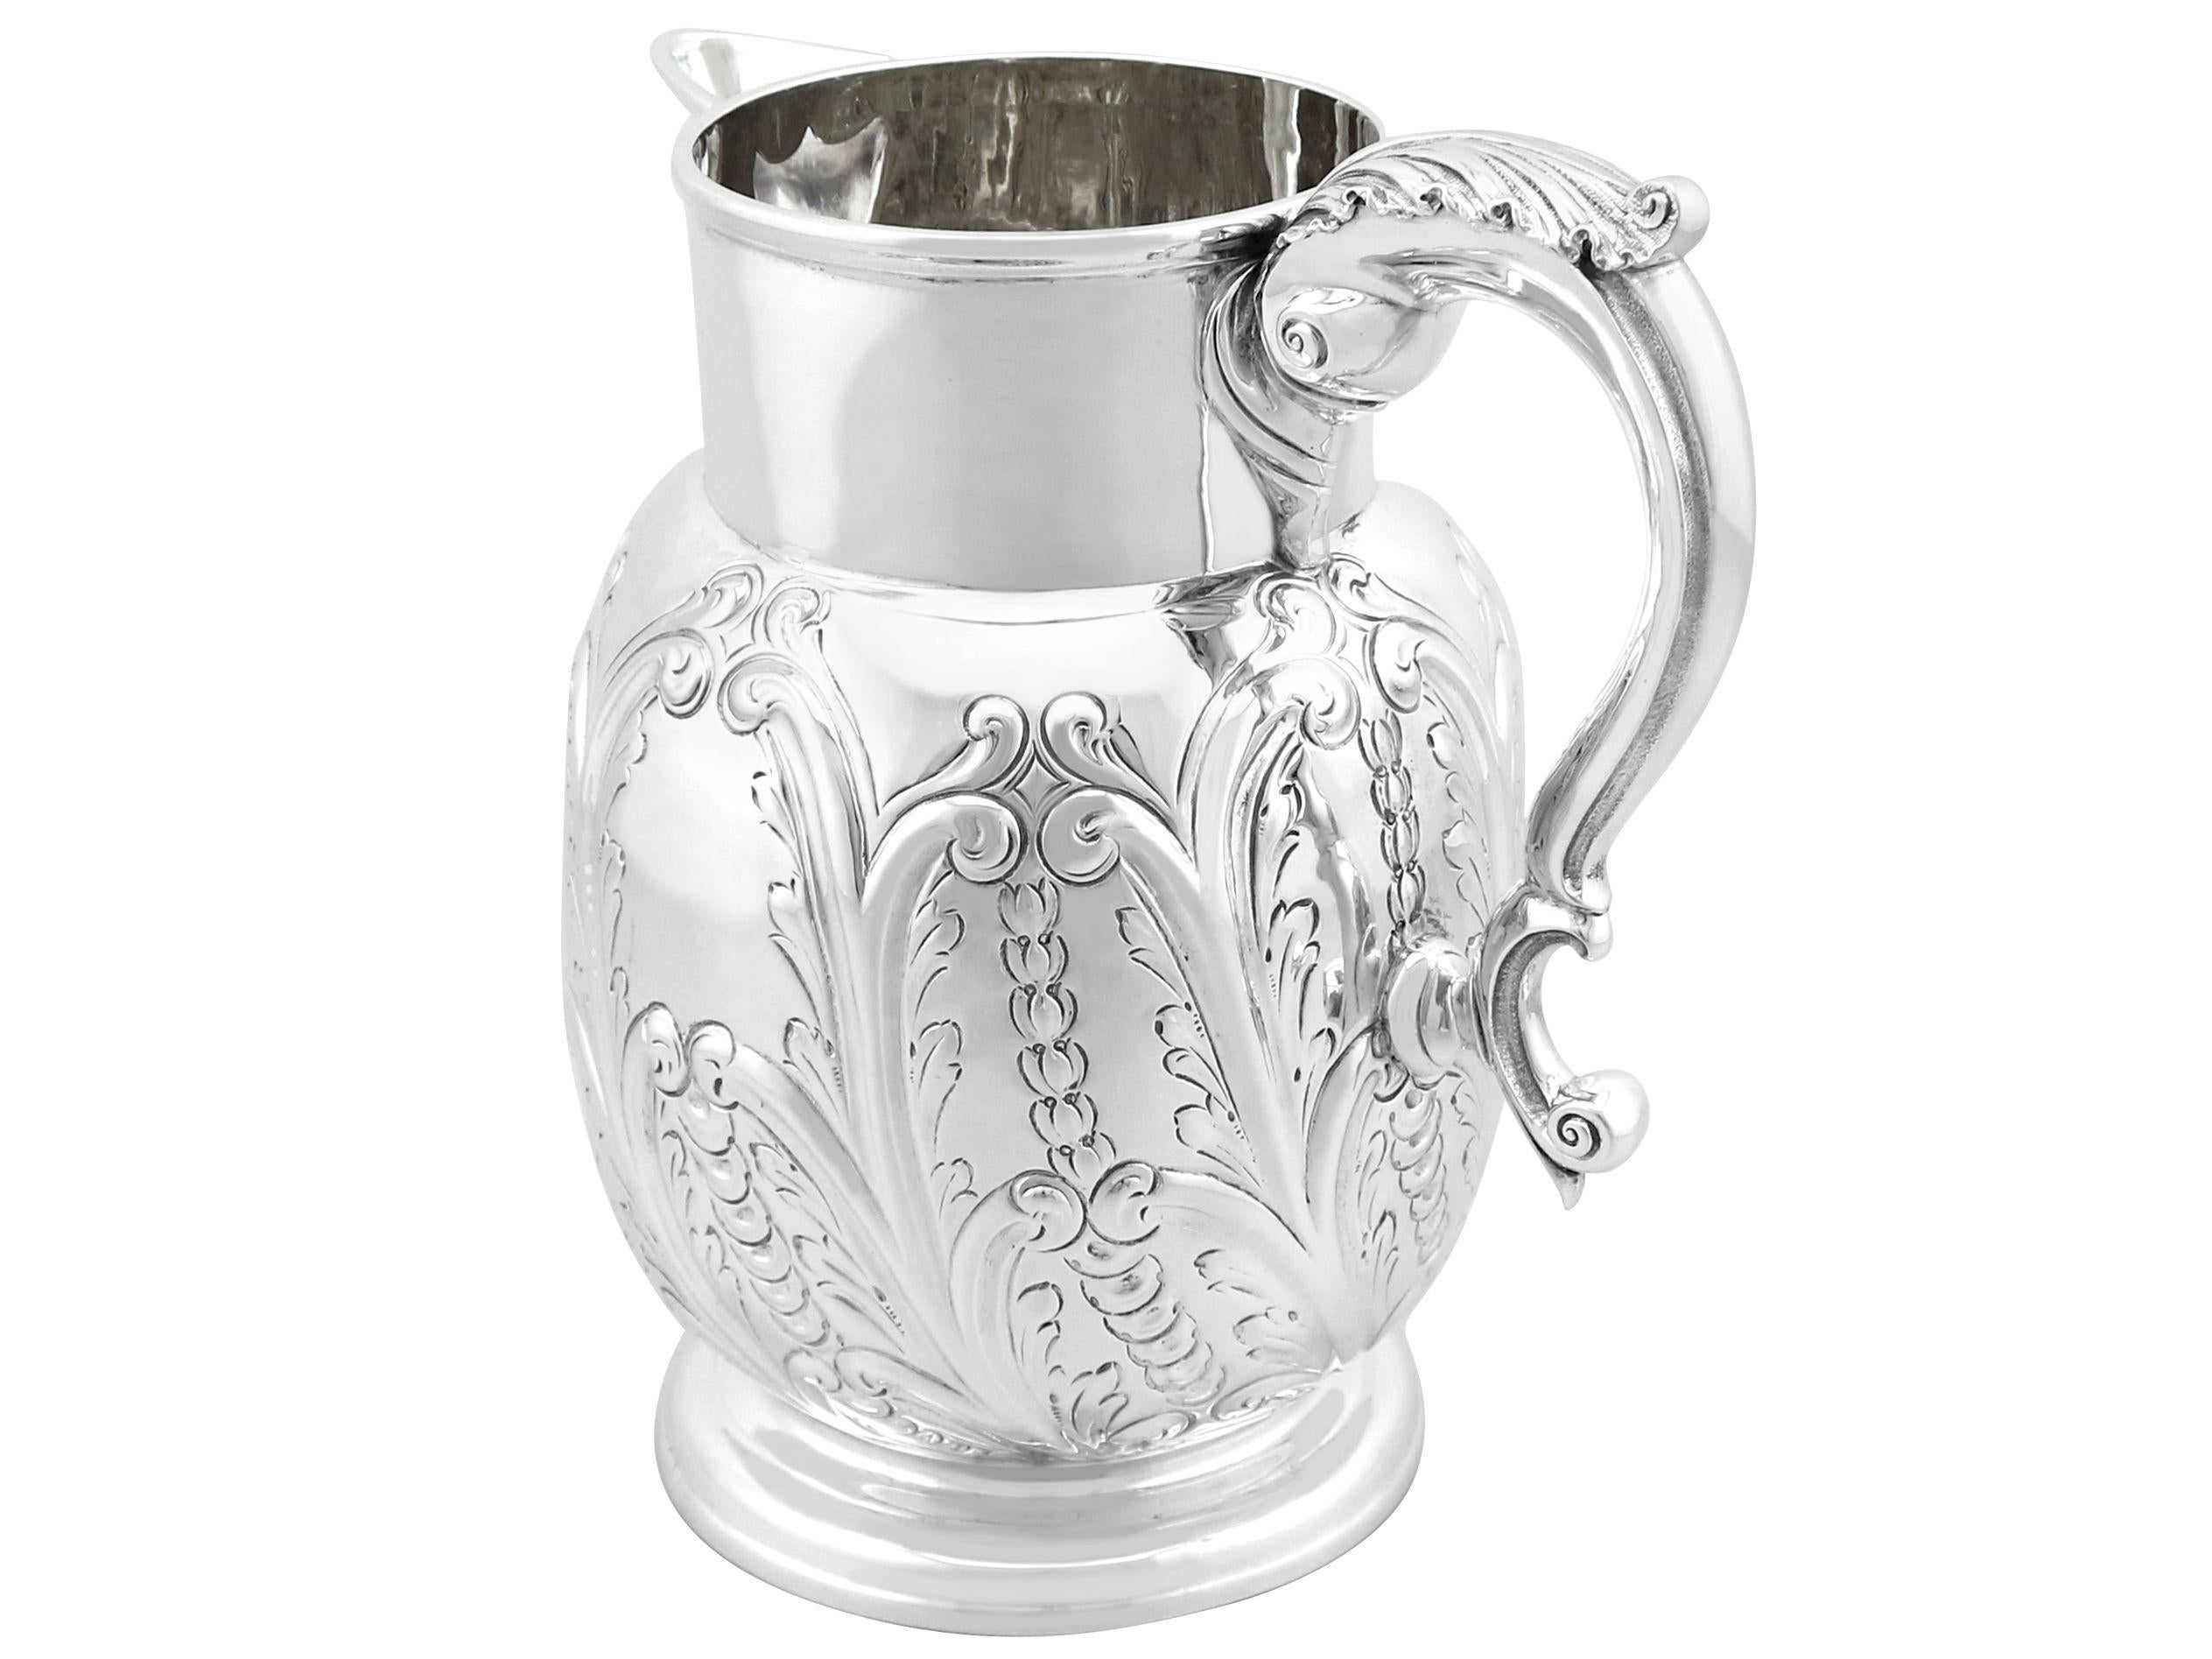 Antique Victorian Sterling Silver Beer / Water / Cordial Jug In Excellent Condition For Sale In Jesmond, Newcastle Upon Tyne